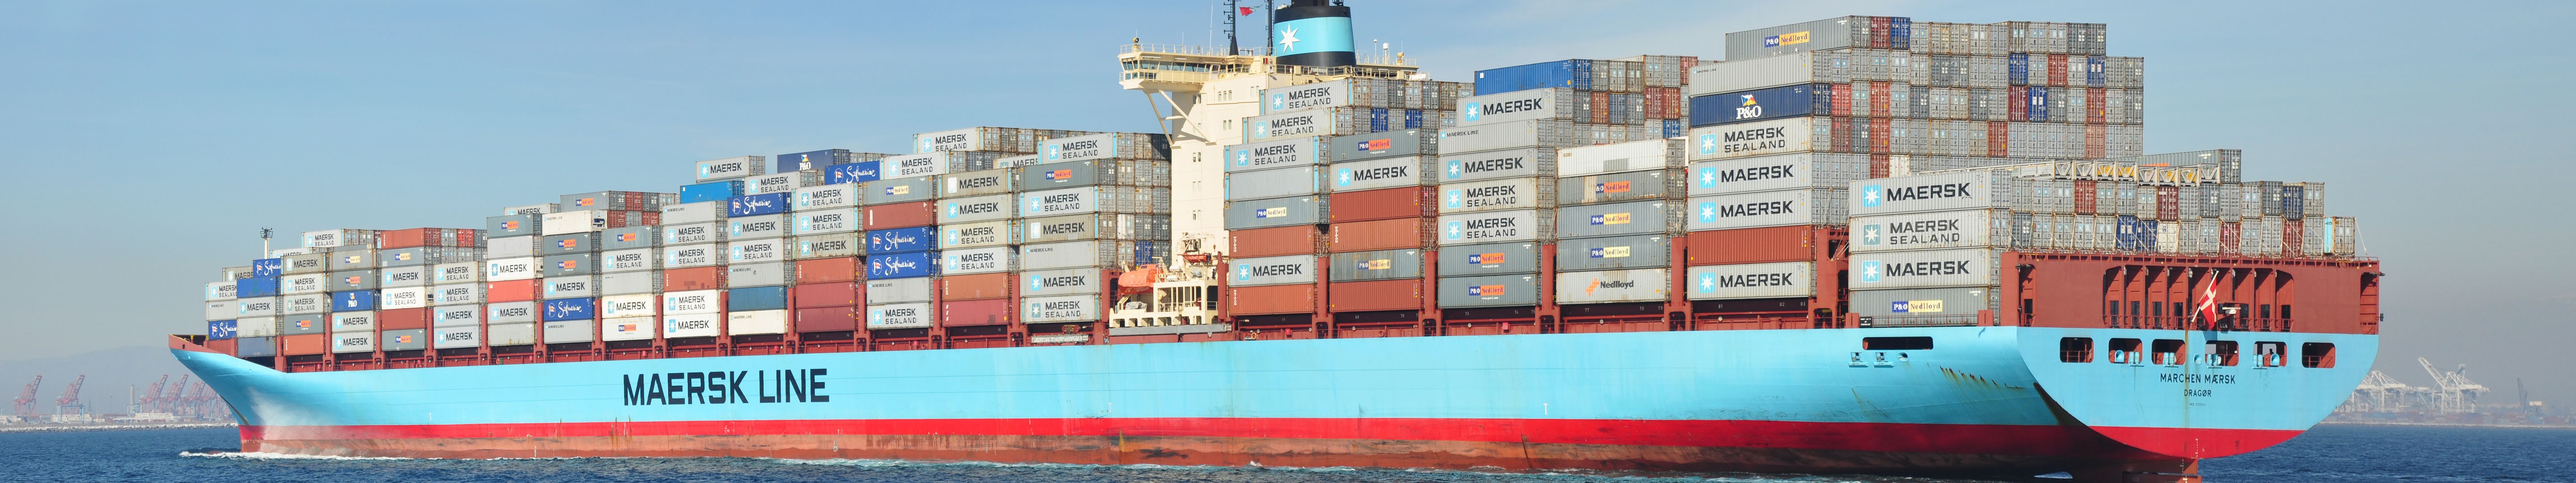 ship, Maersk, Panorama, Harbor, Sea, Water, Vehicle, Freighter, Netherlands, Dutch, Blue, Red, Crate Wallpaper